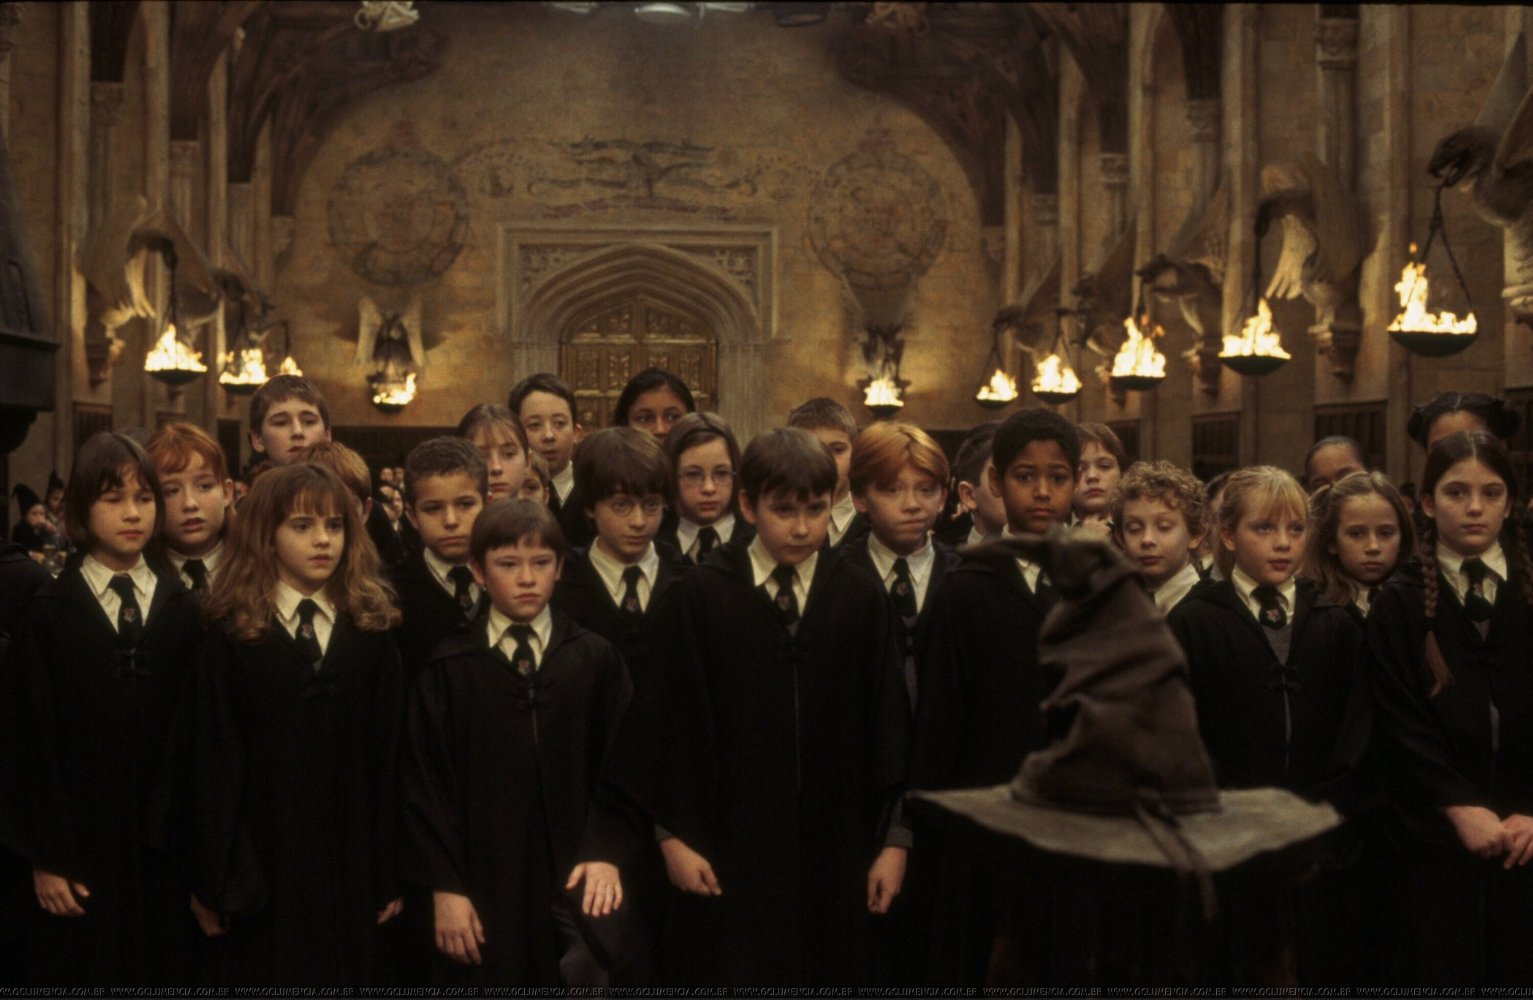 PHOTO: A still from the film "Harry Potter and the Sorcerer's Stone," is seen here.